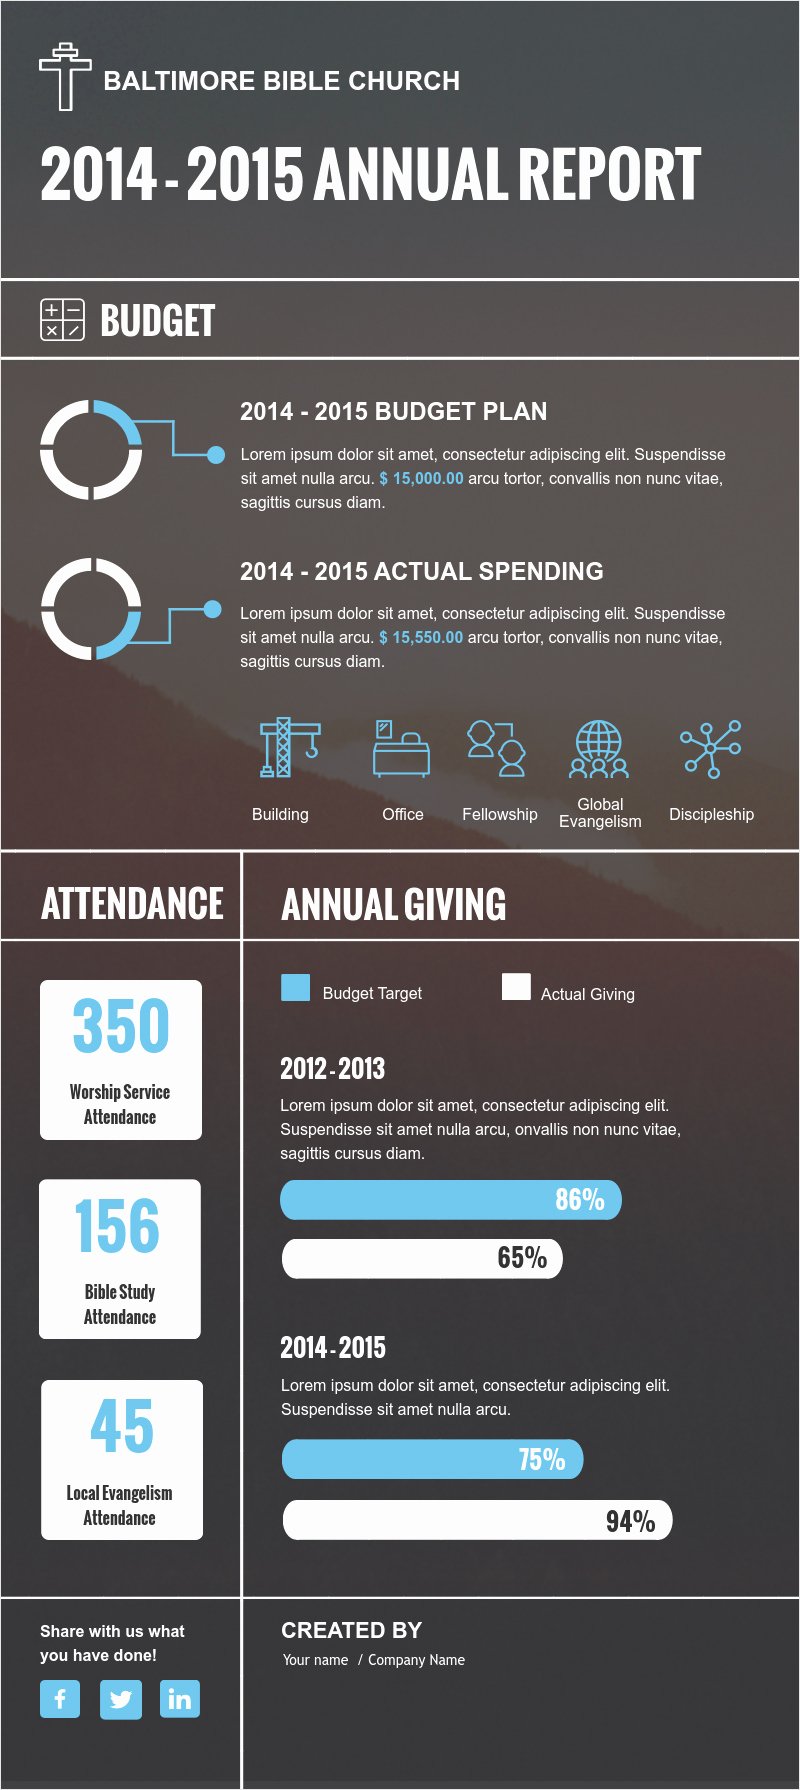 Annual Financial Report Template Luxury Visme Introduces New Infographic Templates for Non Profits